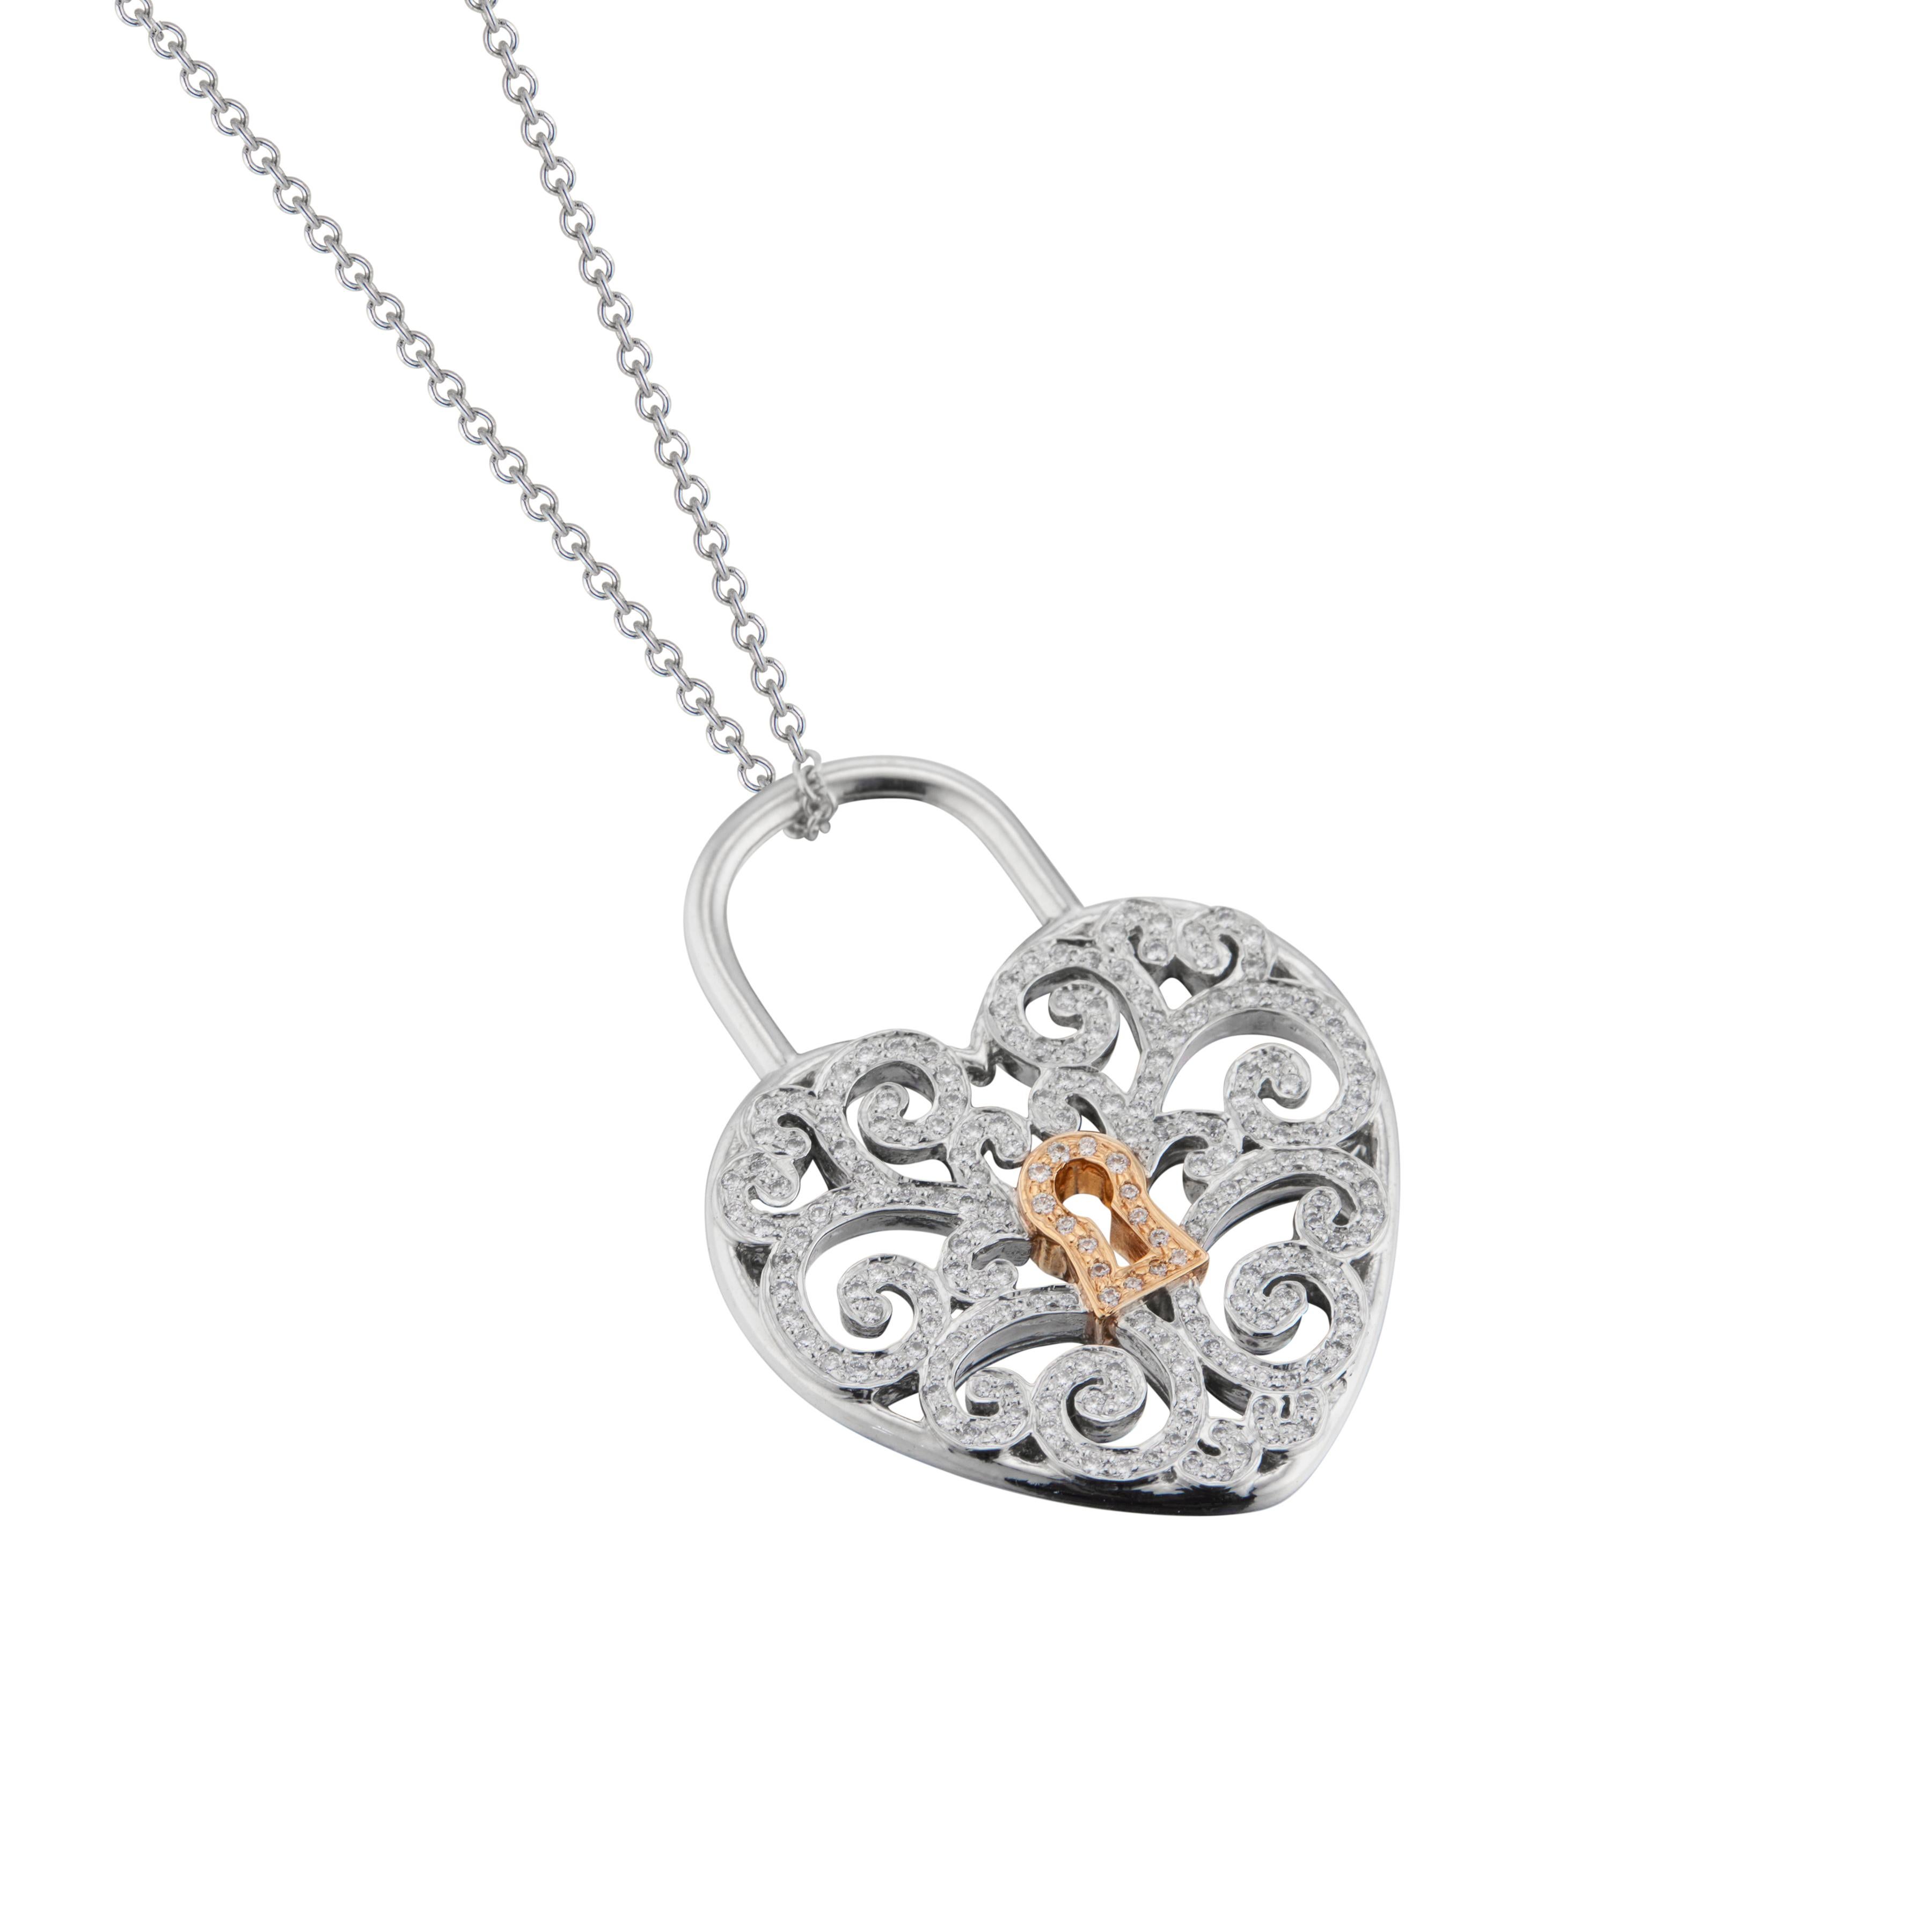 Tiffany & Co Enchant diamond heart lock pendant necklace in platinum with 18k rose gold lock center and 195 round brilliant cut diamonds. 16 inch 18k white gold chain.

195 round brilliant cut diamonds, G VS approx. .95cts 
Platinum 
18k rose